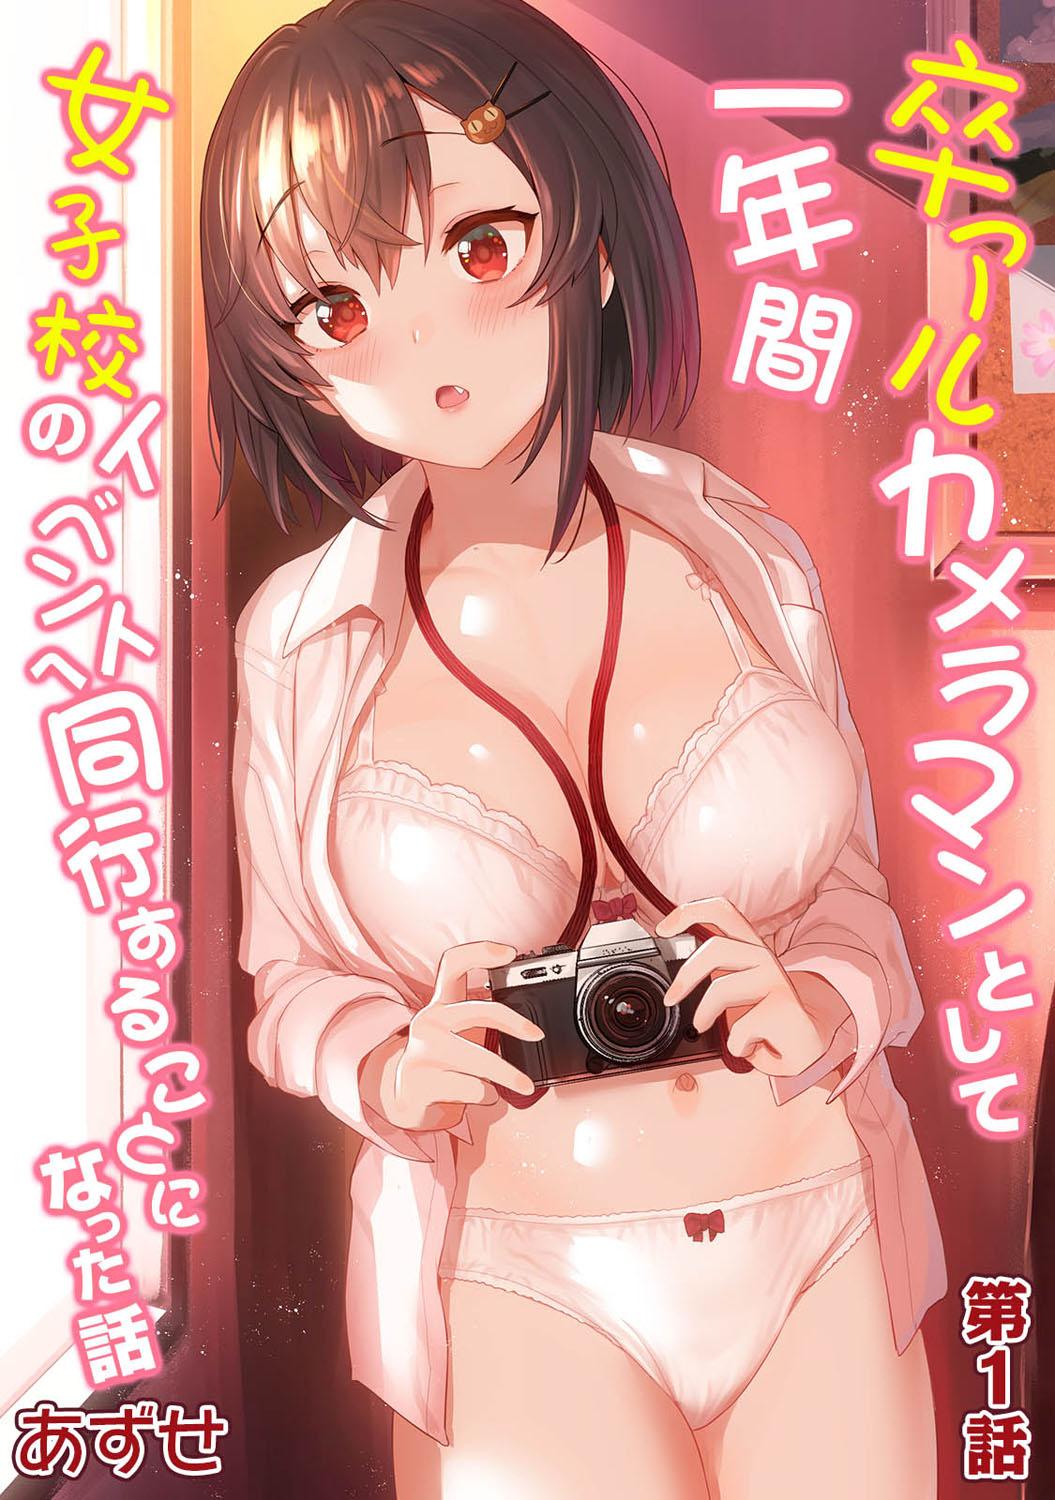 SotsuAl Cameraman to Shite Ichinenkan Joshikou no Event e Doukou Suru Koto ni Natta Hanashi | A Story About How I Ended Up Being A Yearbook Camerman at an All Girls' School For A Year Ch. 1 0